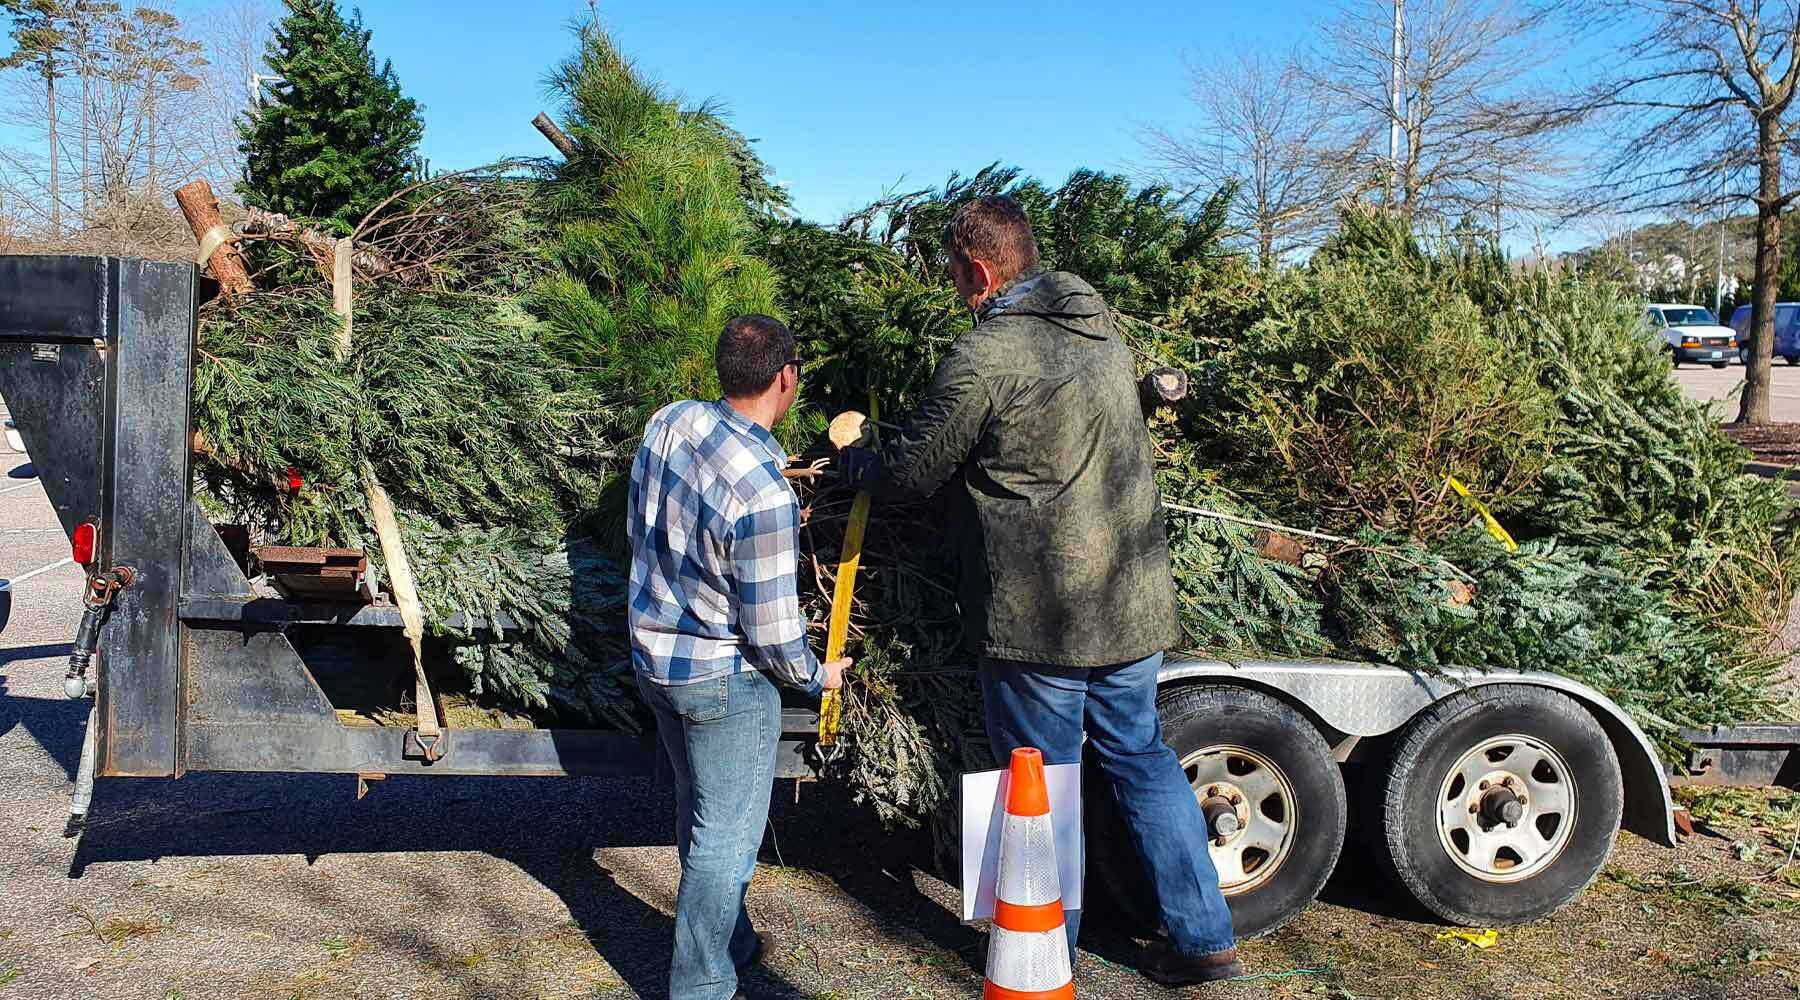 Workers Recycling Christmas Trees